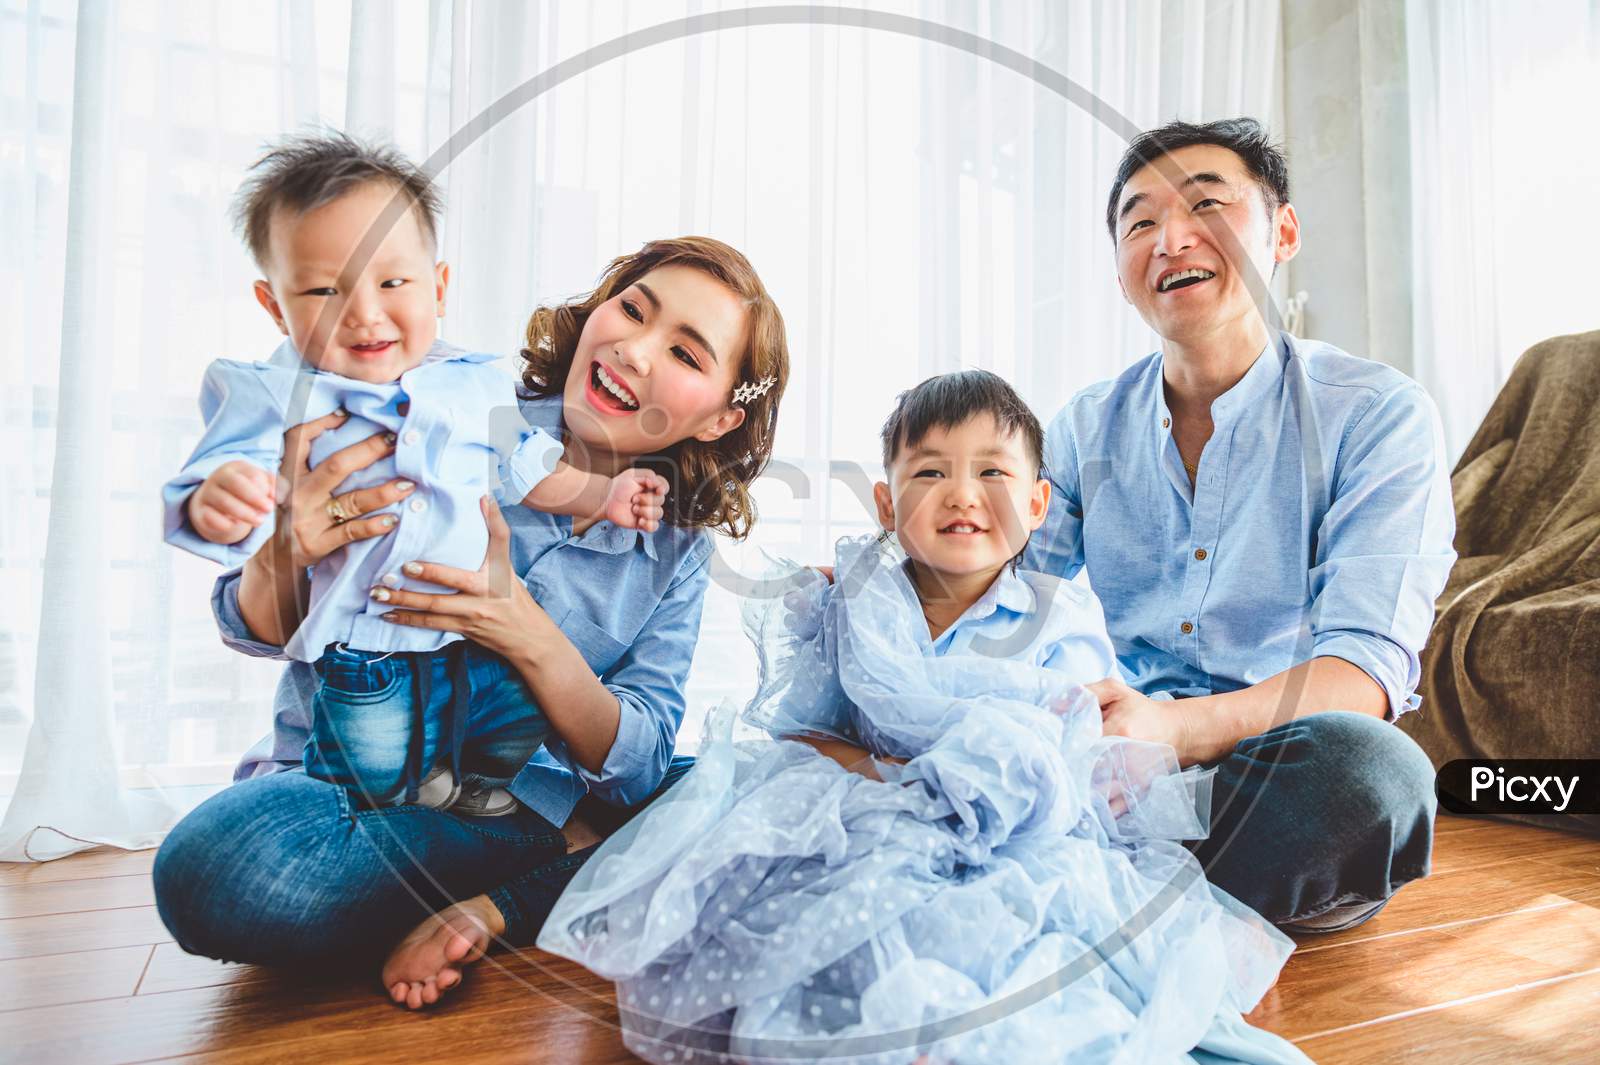 Happy Asian Family Smile And Laugh Together In Living Room At Home. Two Parents And Two Children Kids. People Lifestyle In State Quarantine After Travel On Covid-19 Or Coronavirus Epidemic Concept